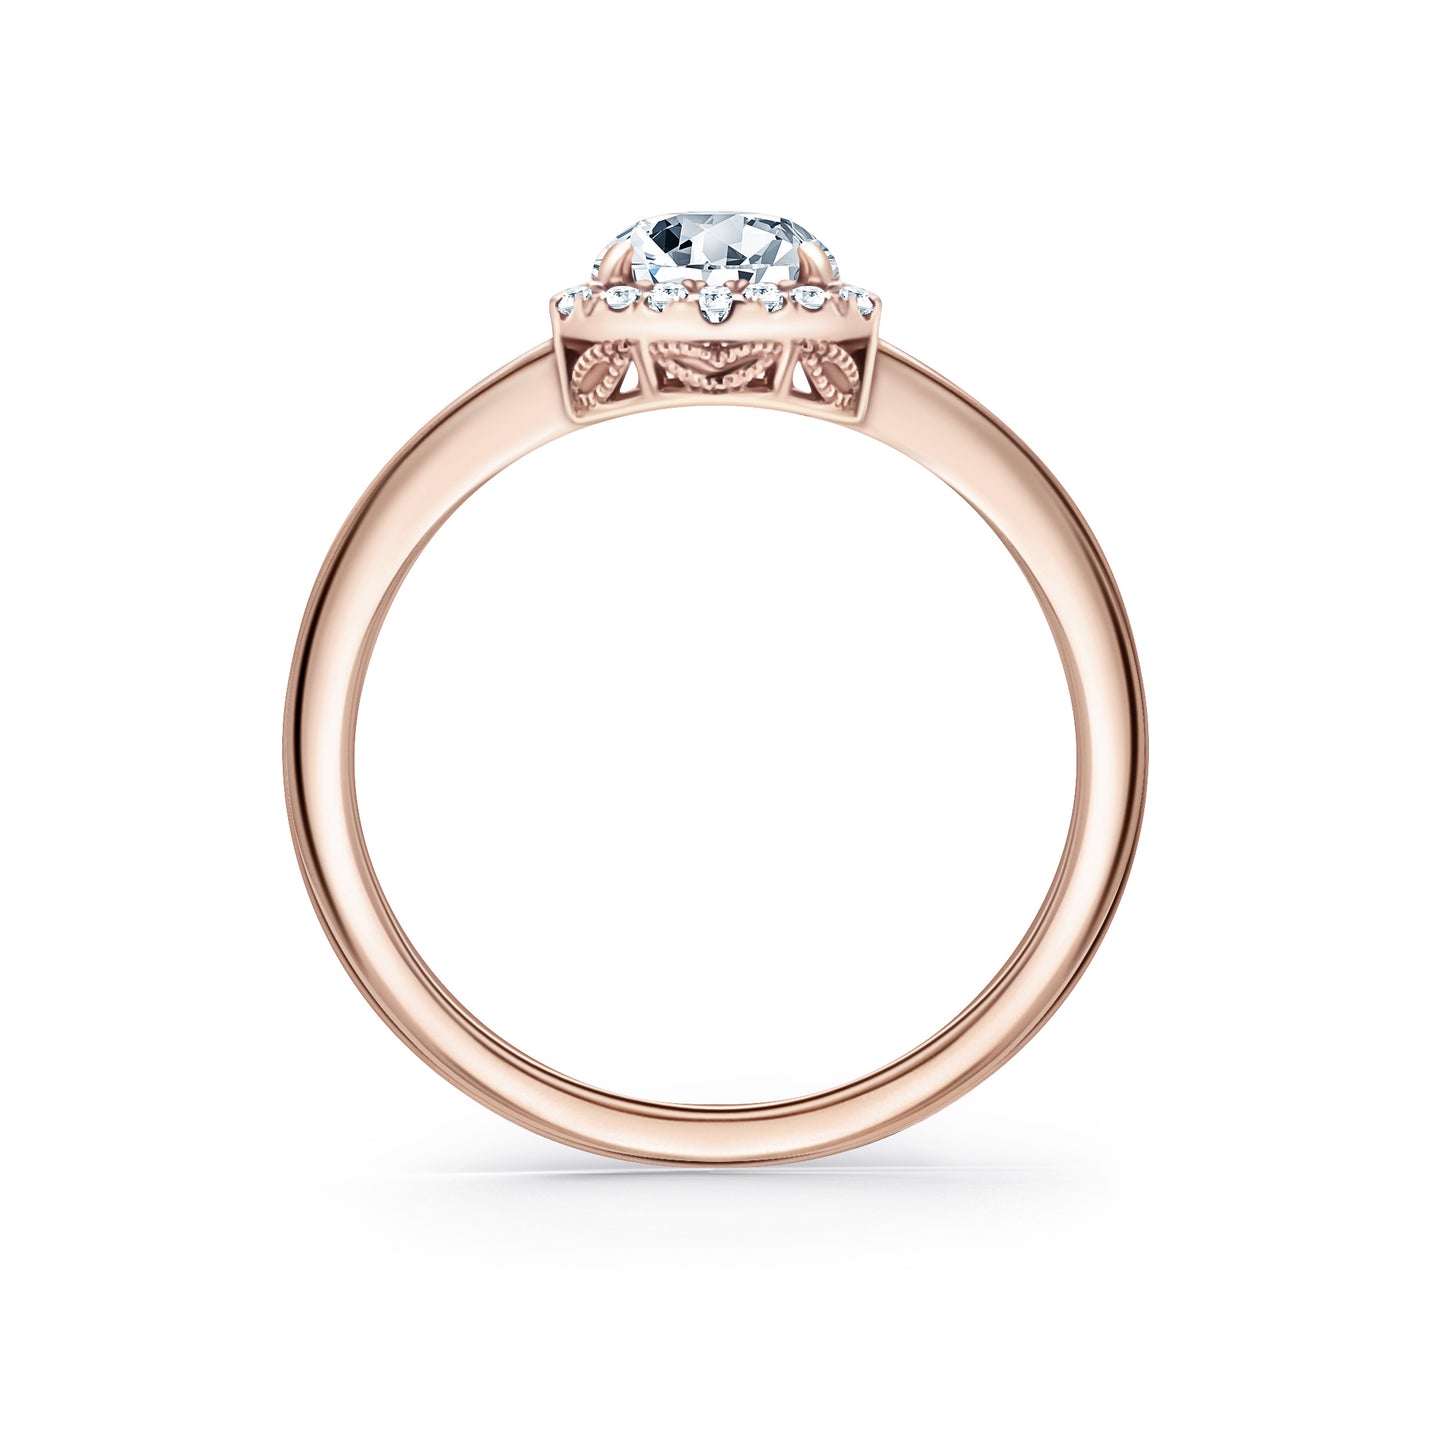 Floral Delicate Rose Cut Halo Diamond Engagement Ring